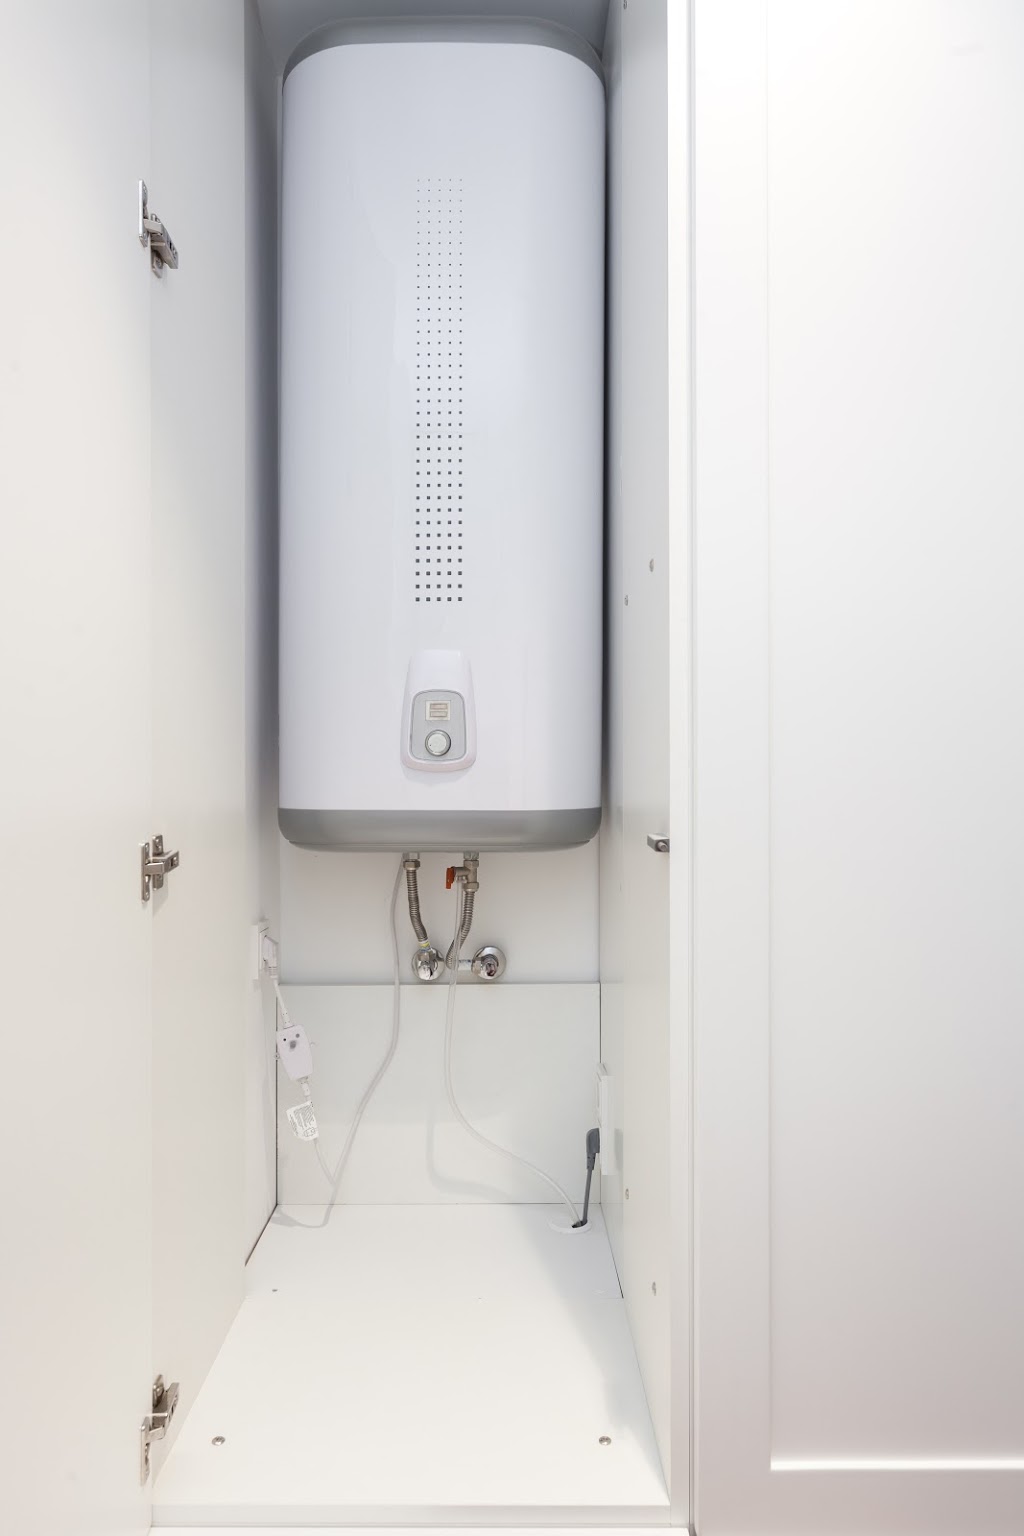 DR Hot Water Pyrmont | Hot Water Services, Hot Water Repairs, Hot Water Installation Hot Water Plumbing, Hot Water Tank Service, Hot Water Leaking, Gas Hot Water Services, Electric Hot Water Services, Pyrmont NSW 2009, Australia | Phone: 0480 024 185